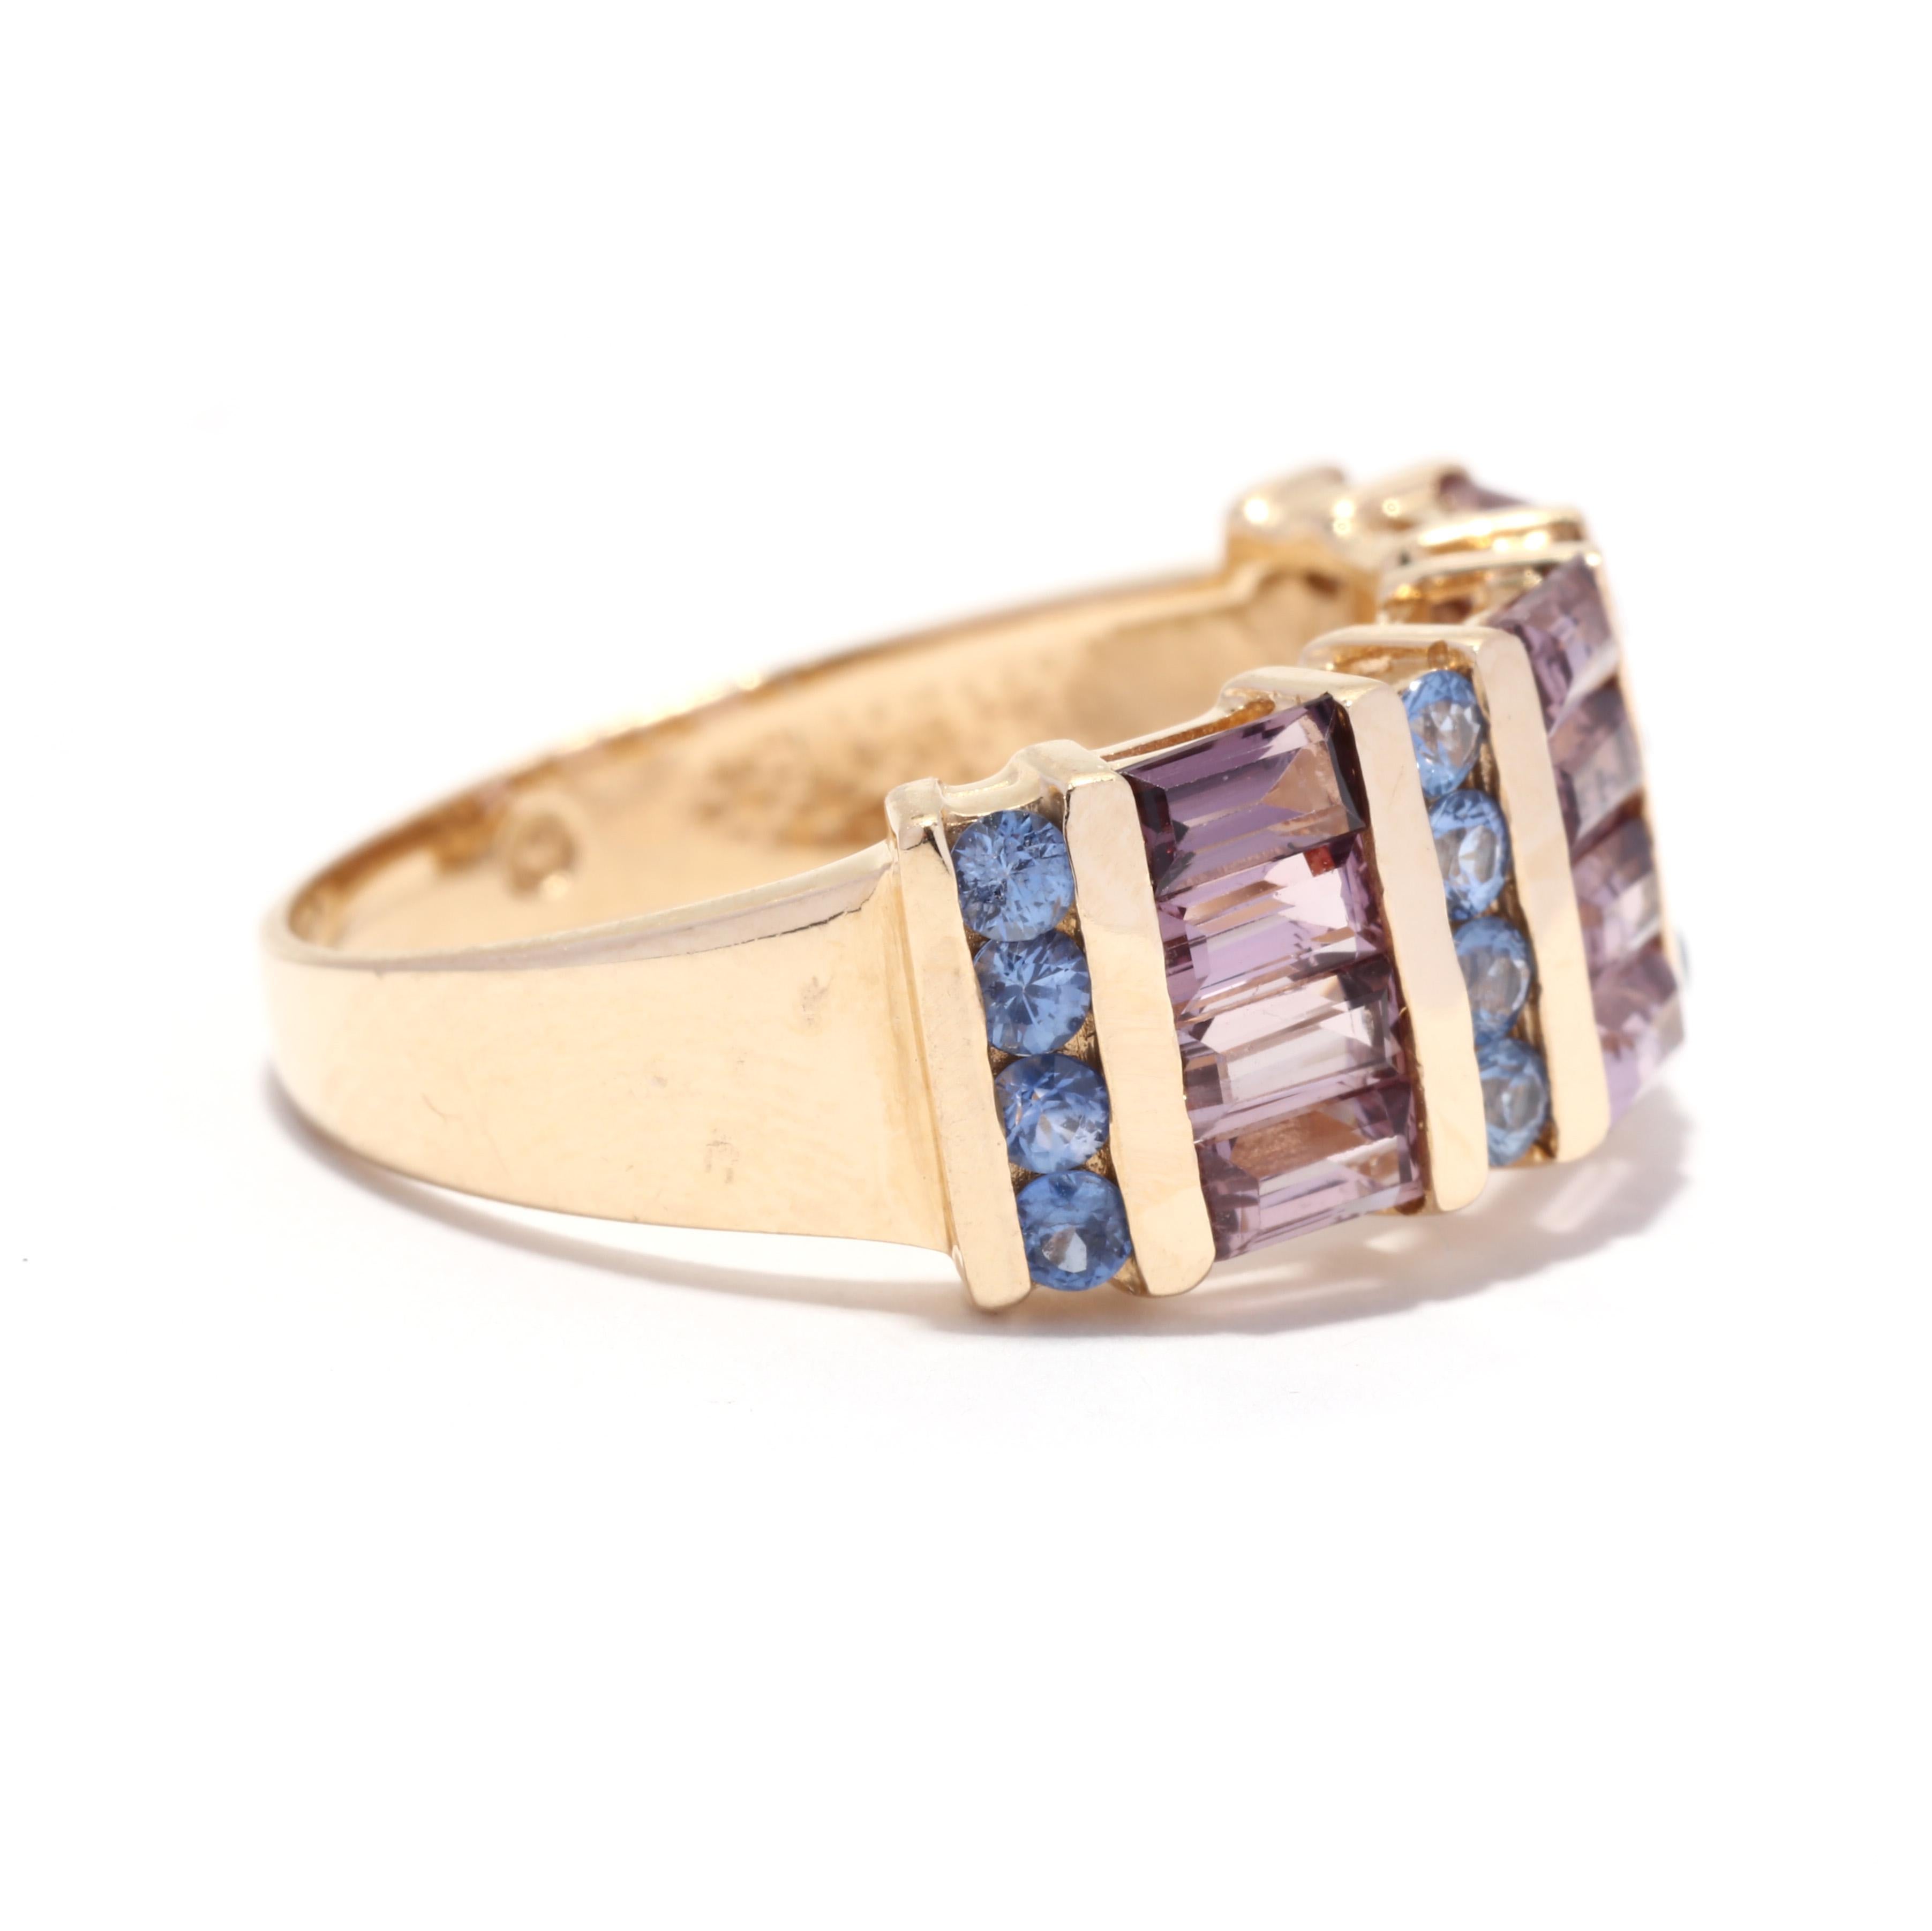 A vintage 14 karat yellow gold purple and blue sapphire wide band ring. This Art Deco style ring features alternating rows of channel set round cut but sapphires weighing approximately .64 total carats with baguette cut purple sapphires weighing